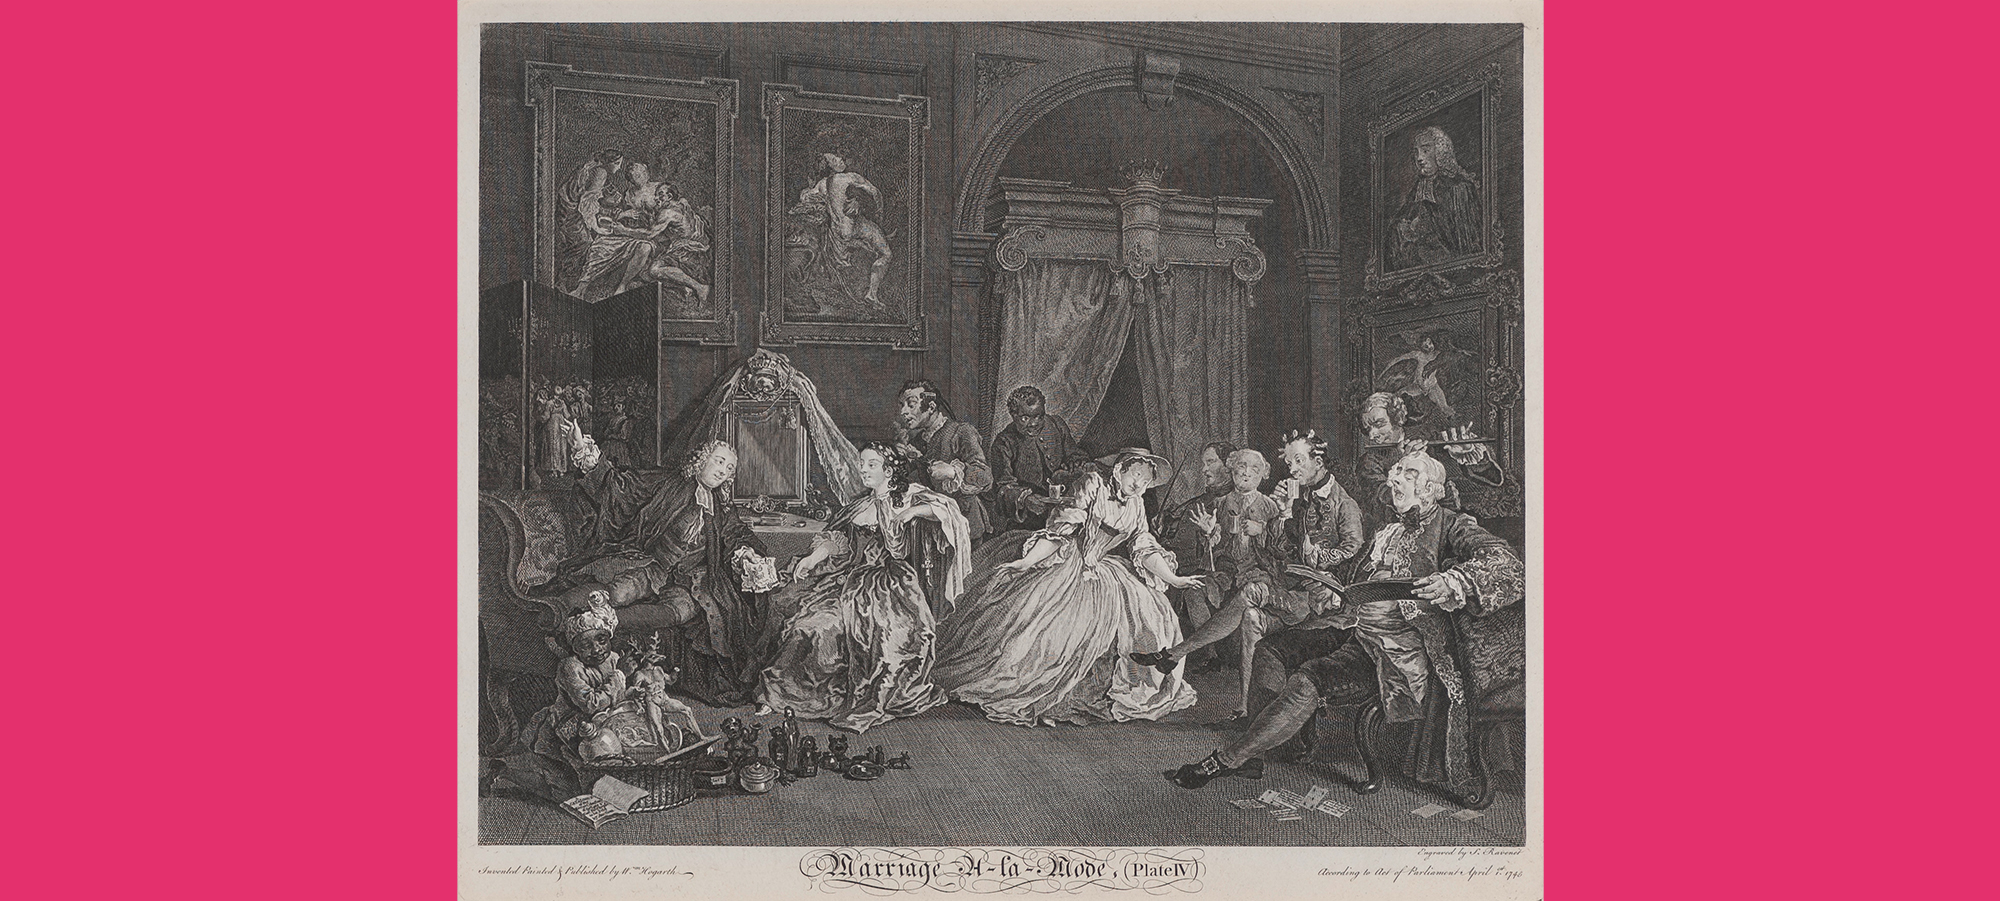 Full image of William Hogarth's engraving depicting a social gathering of a wife